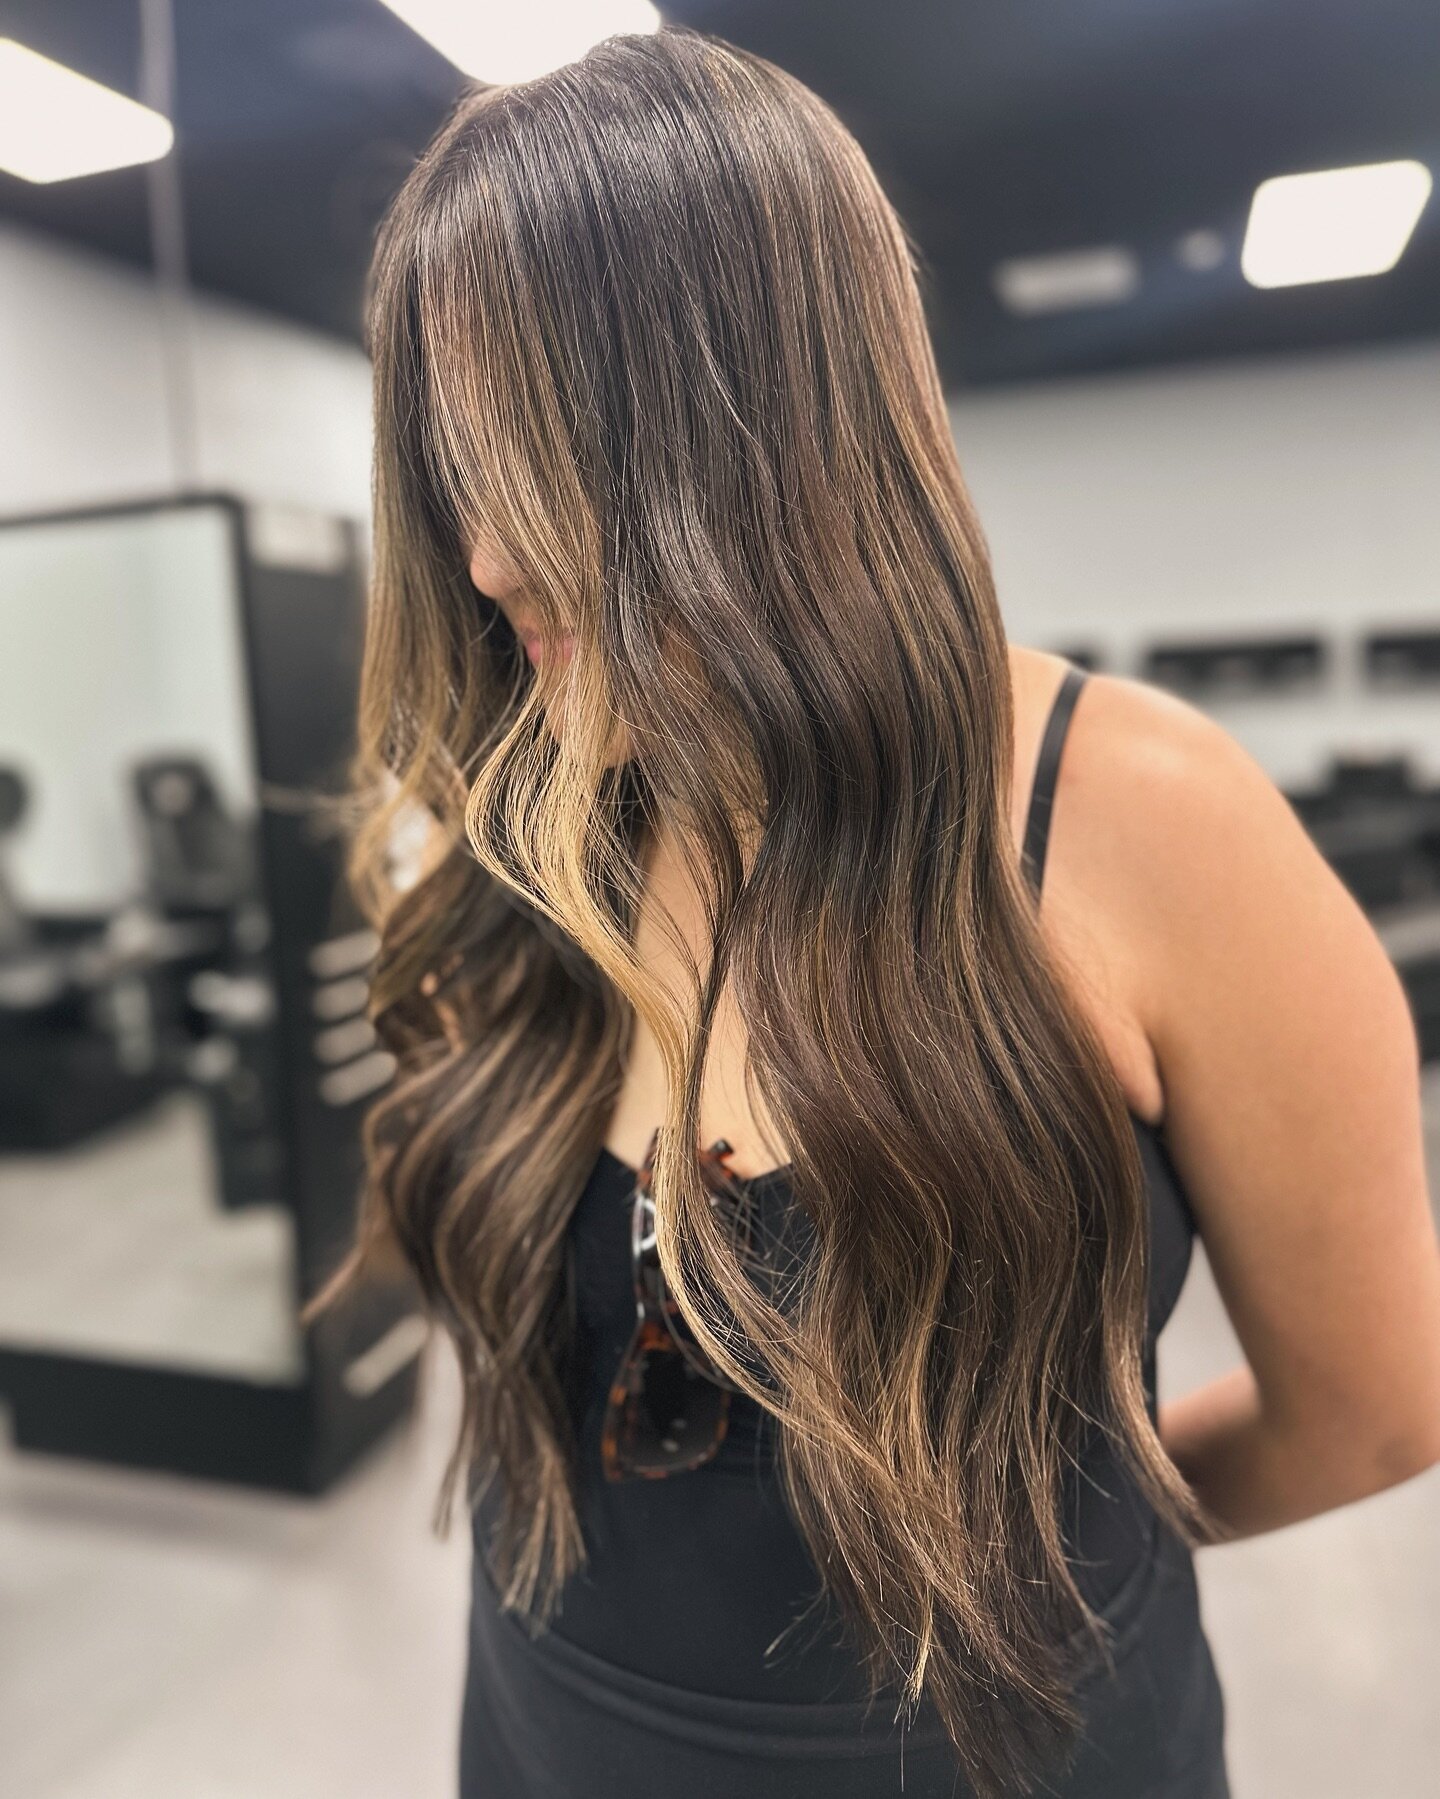 The low maintenance 👑 
I&rsquo;ve been doing her hair for the last 4 years &amp; we only refresh her balayage once a year. 
&bull;

&bull;

&bull;
#adelantohairstylist #adelantohair #adelantosalon #bghussle #victorvillehair #victorvillehairstylist #